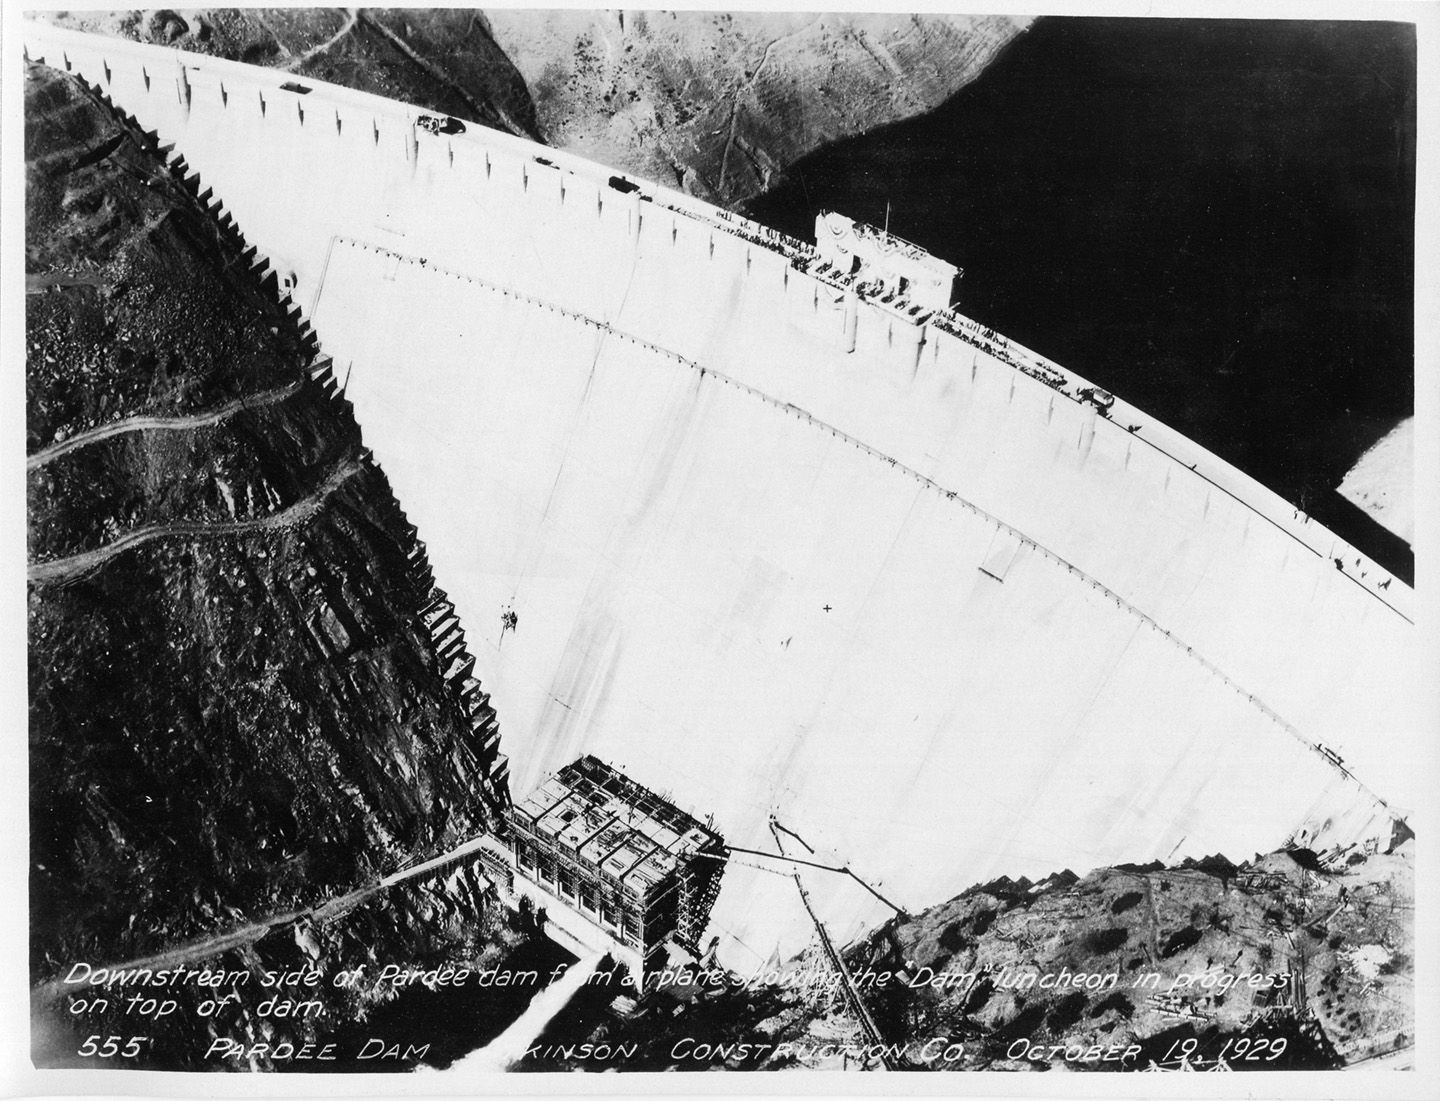 Downstream side of Pardee Dam from airplane showing "Dam" luncheon in progress. (October 1929)	